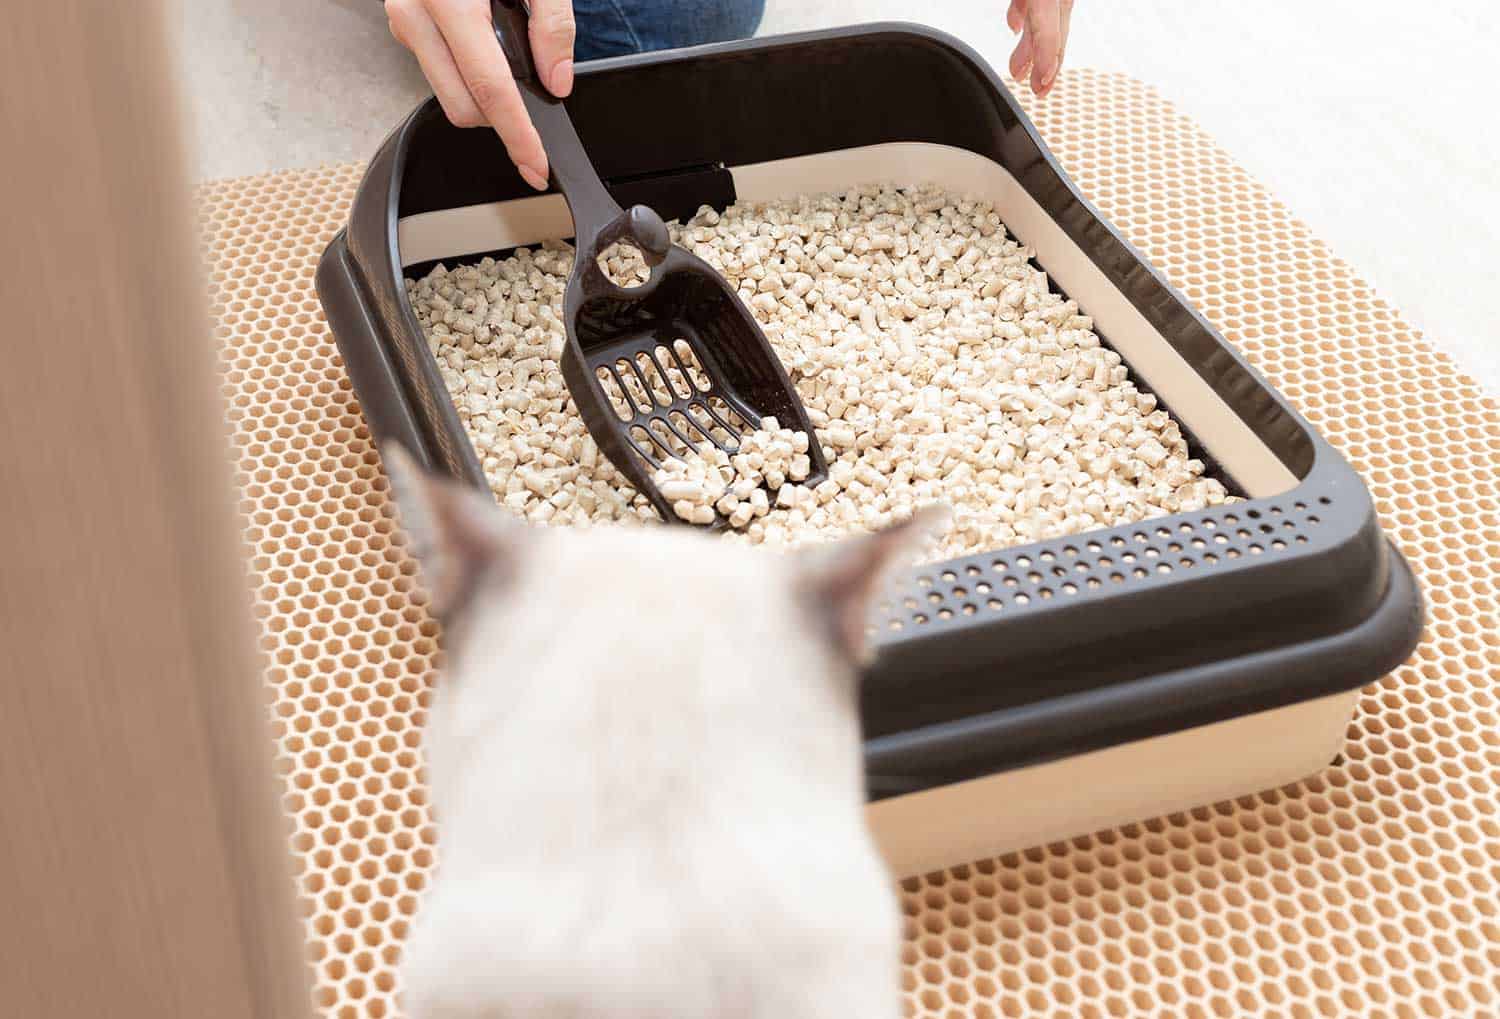 Female hands cleaning cat litter box with scoop